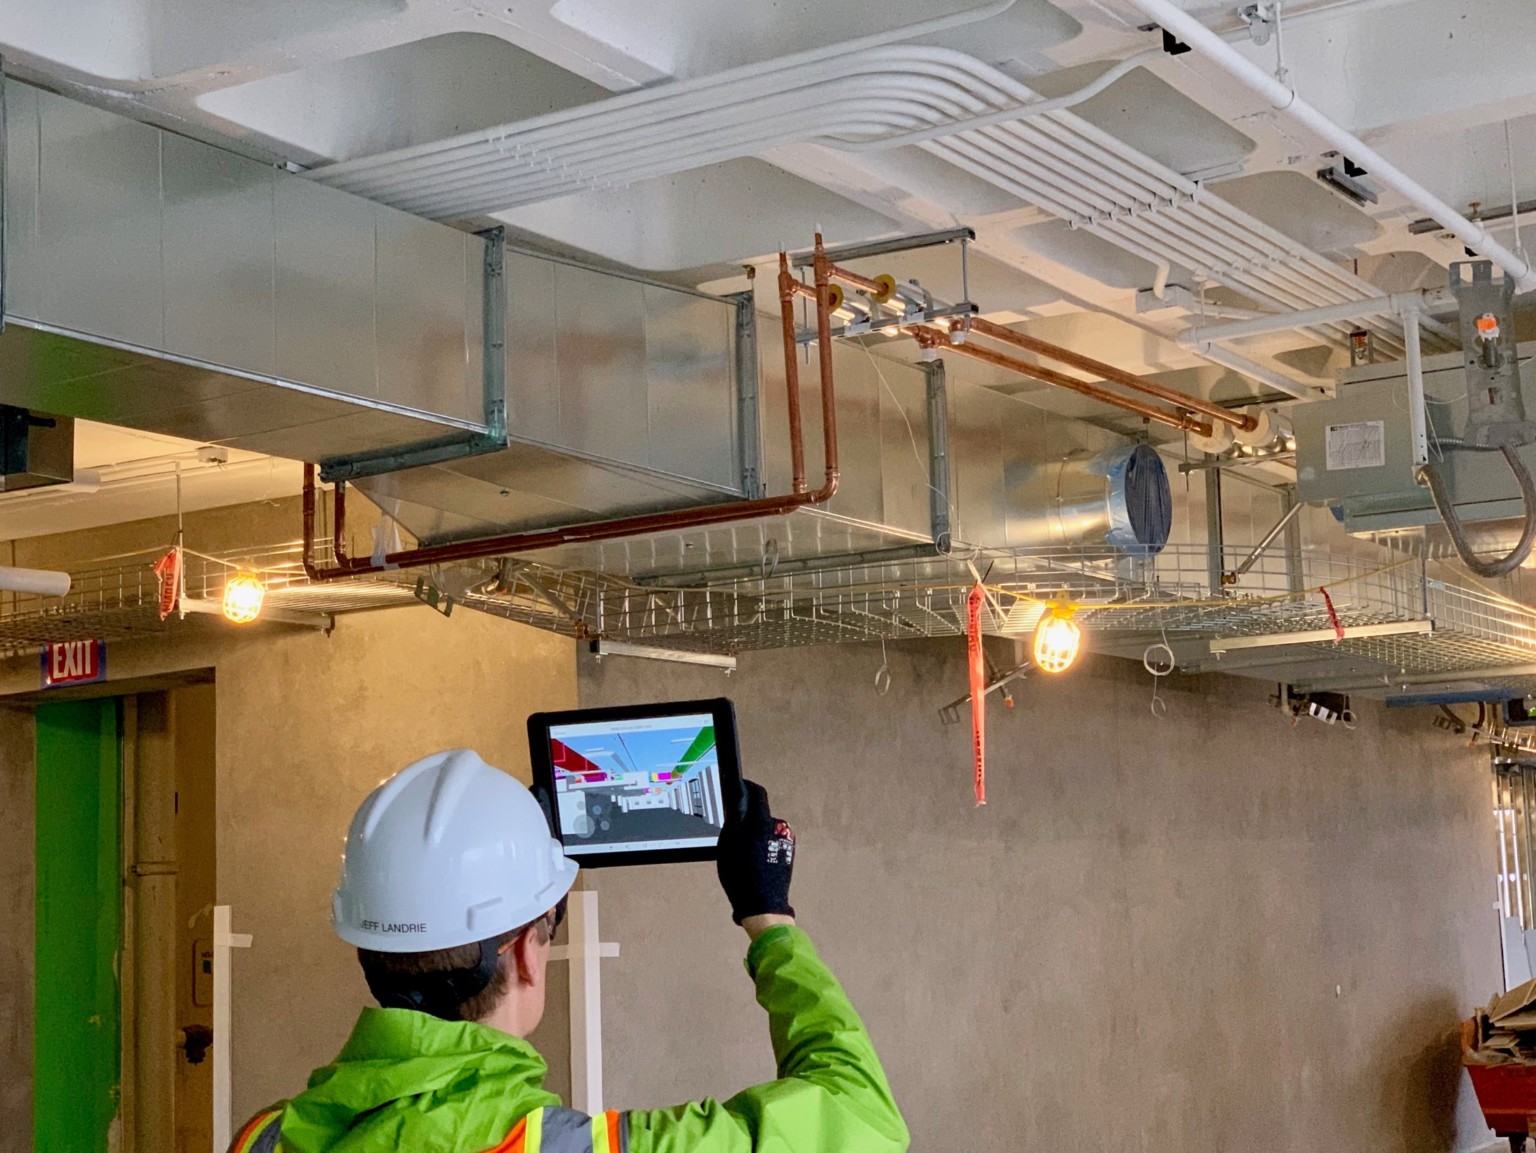 person in bright green safety jacket and construction hat with handheld screen device up at ceiling pipes on construction site